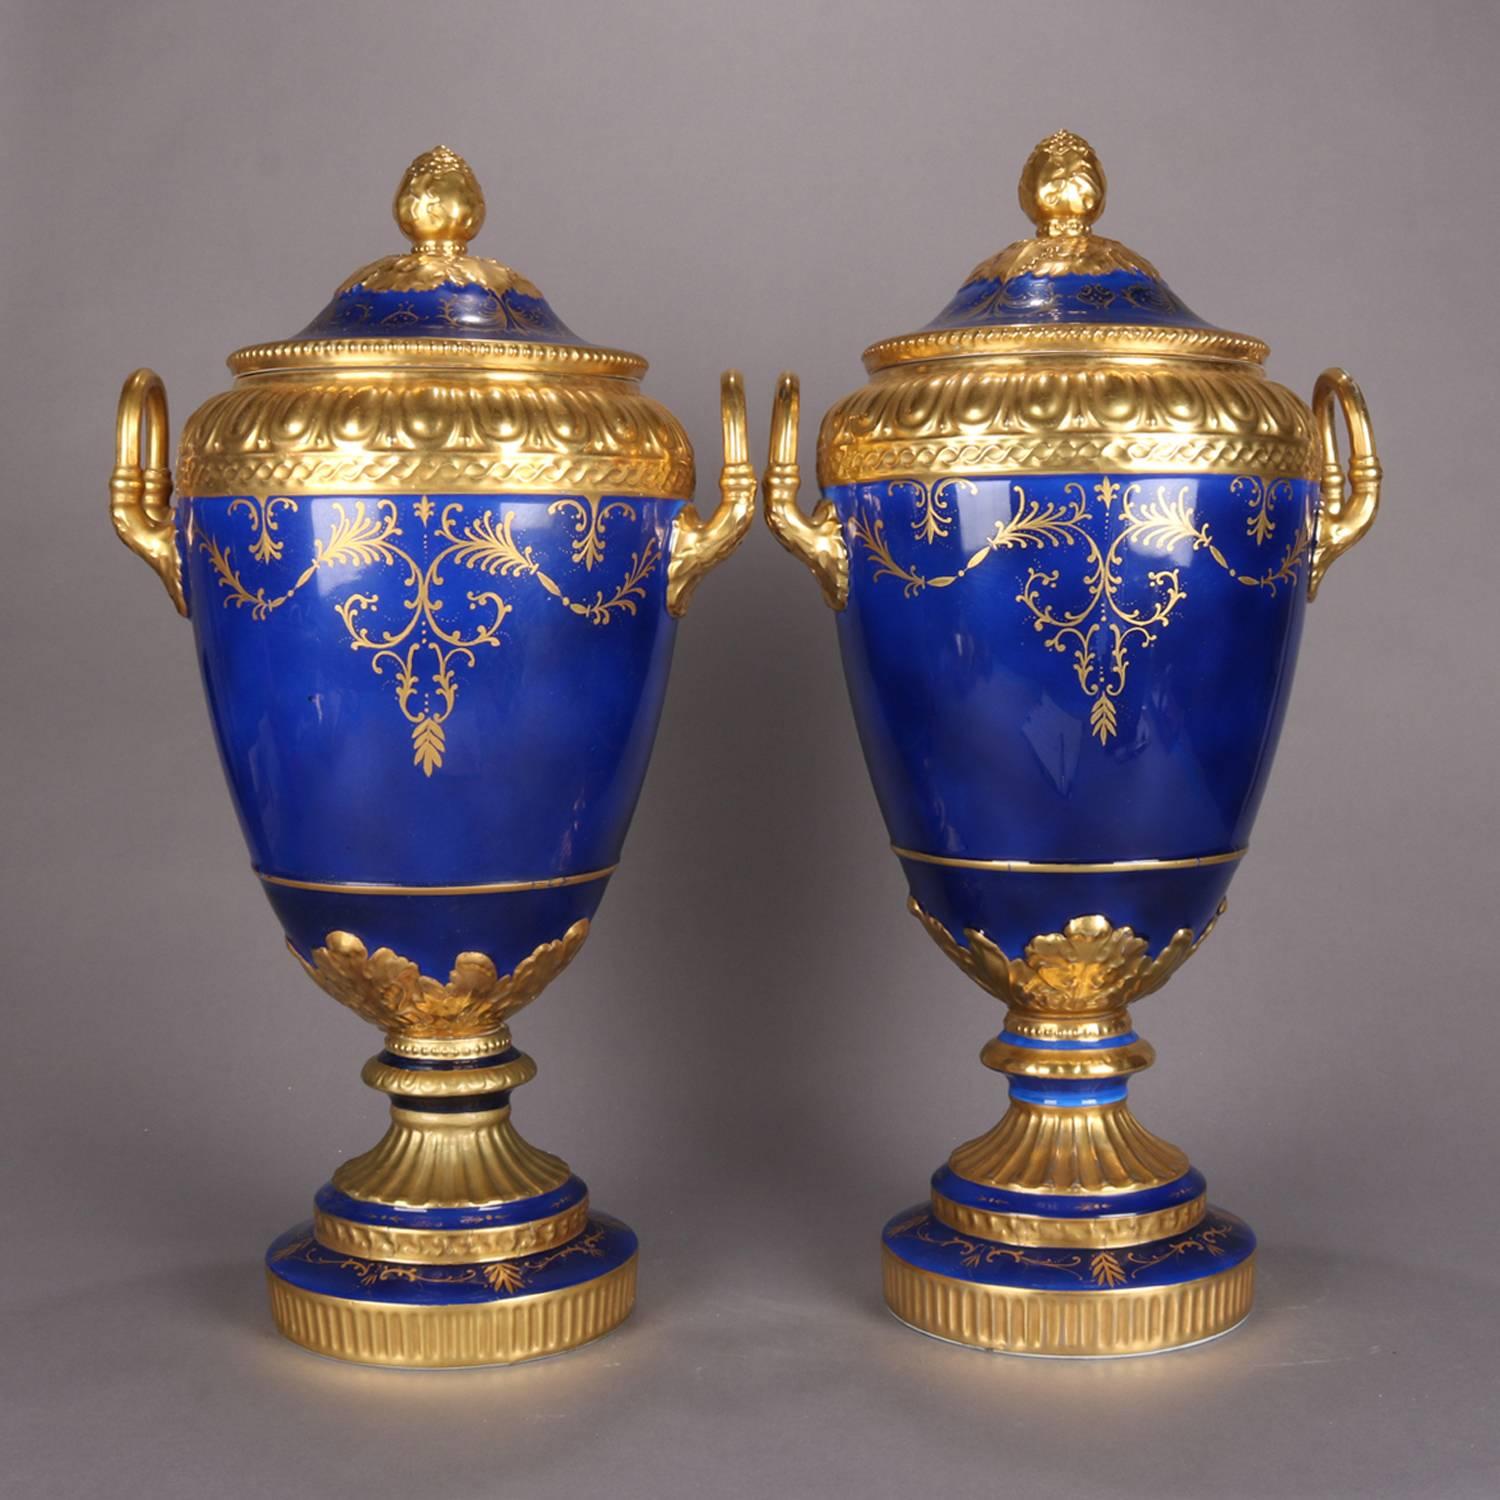 Monumental French Sevres School Hand-Painted Cobalt and Gilt Porcelain Urns 7